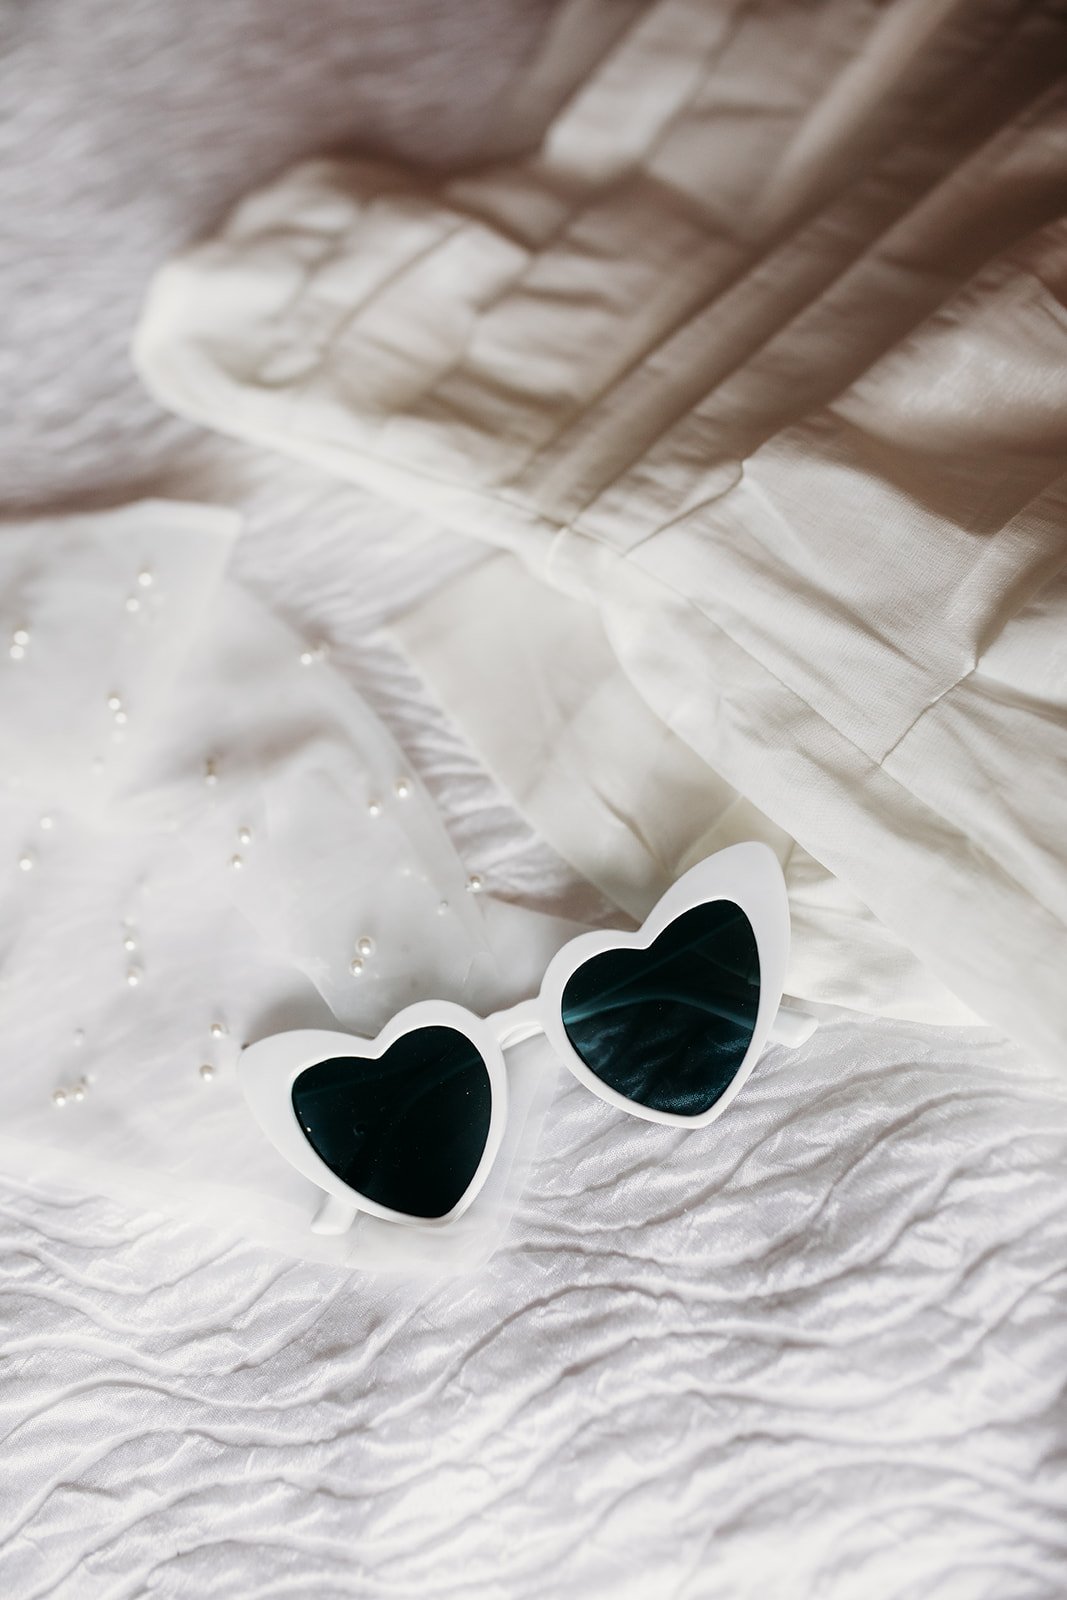 white heart shaped sunglasses rest on white bed